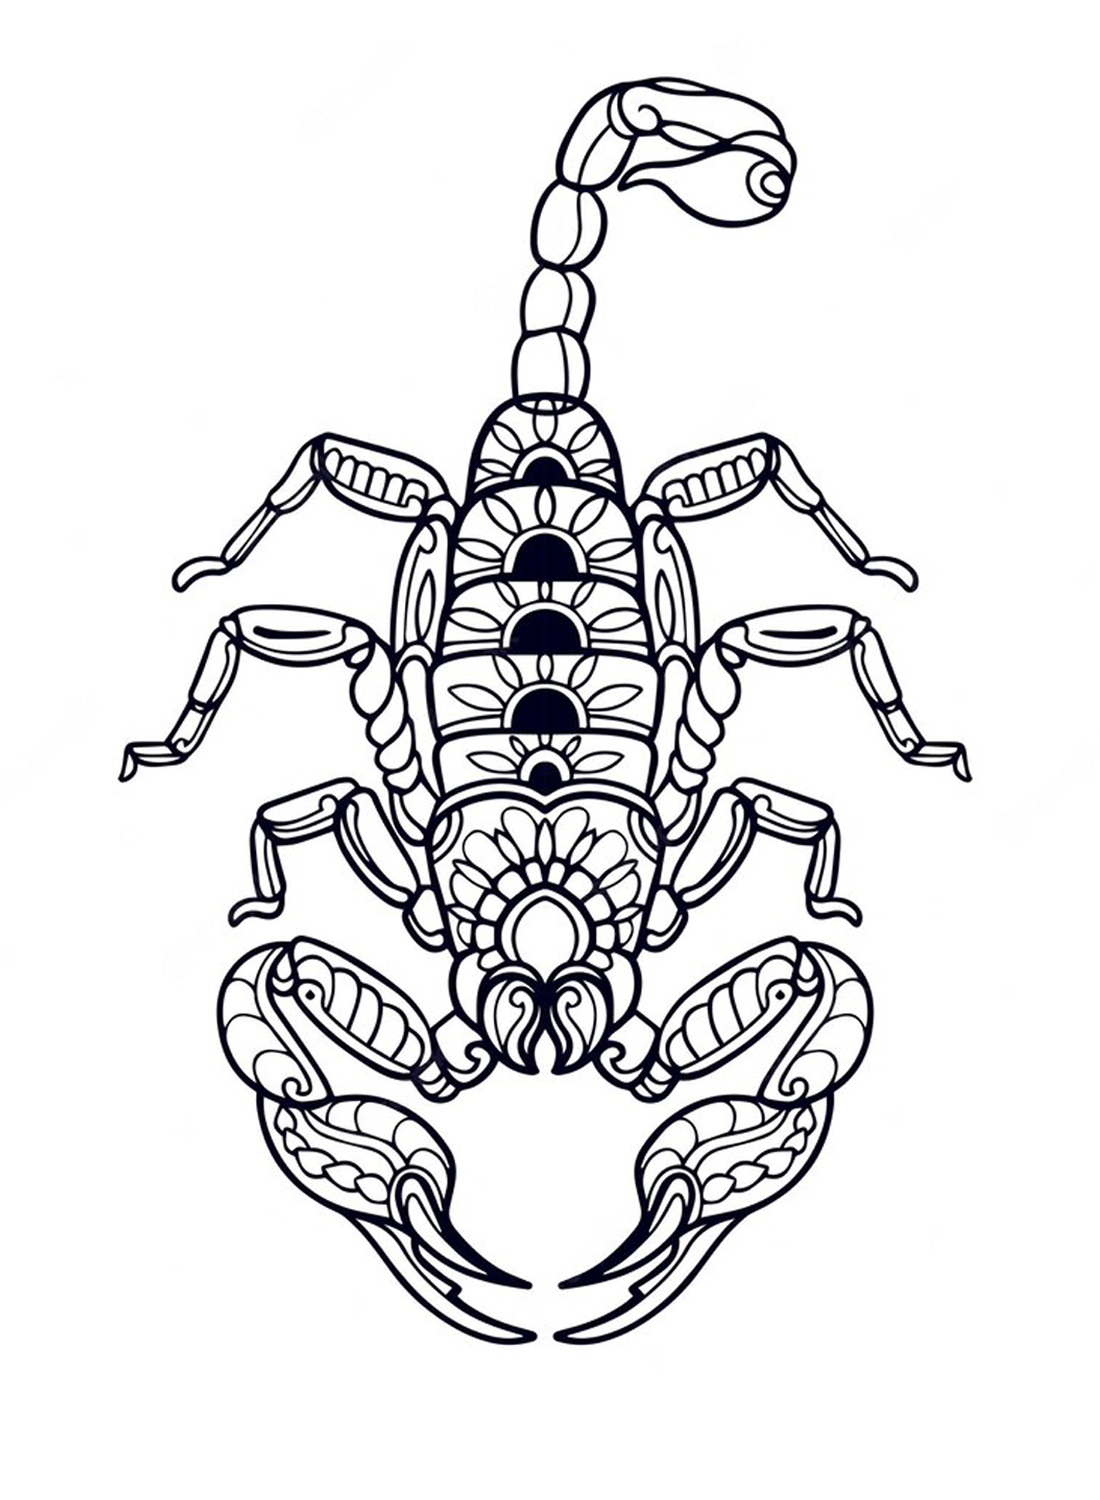 A giant Scorpion Coloring Page - Free Printable Coloring Pages